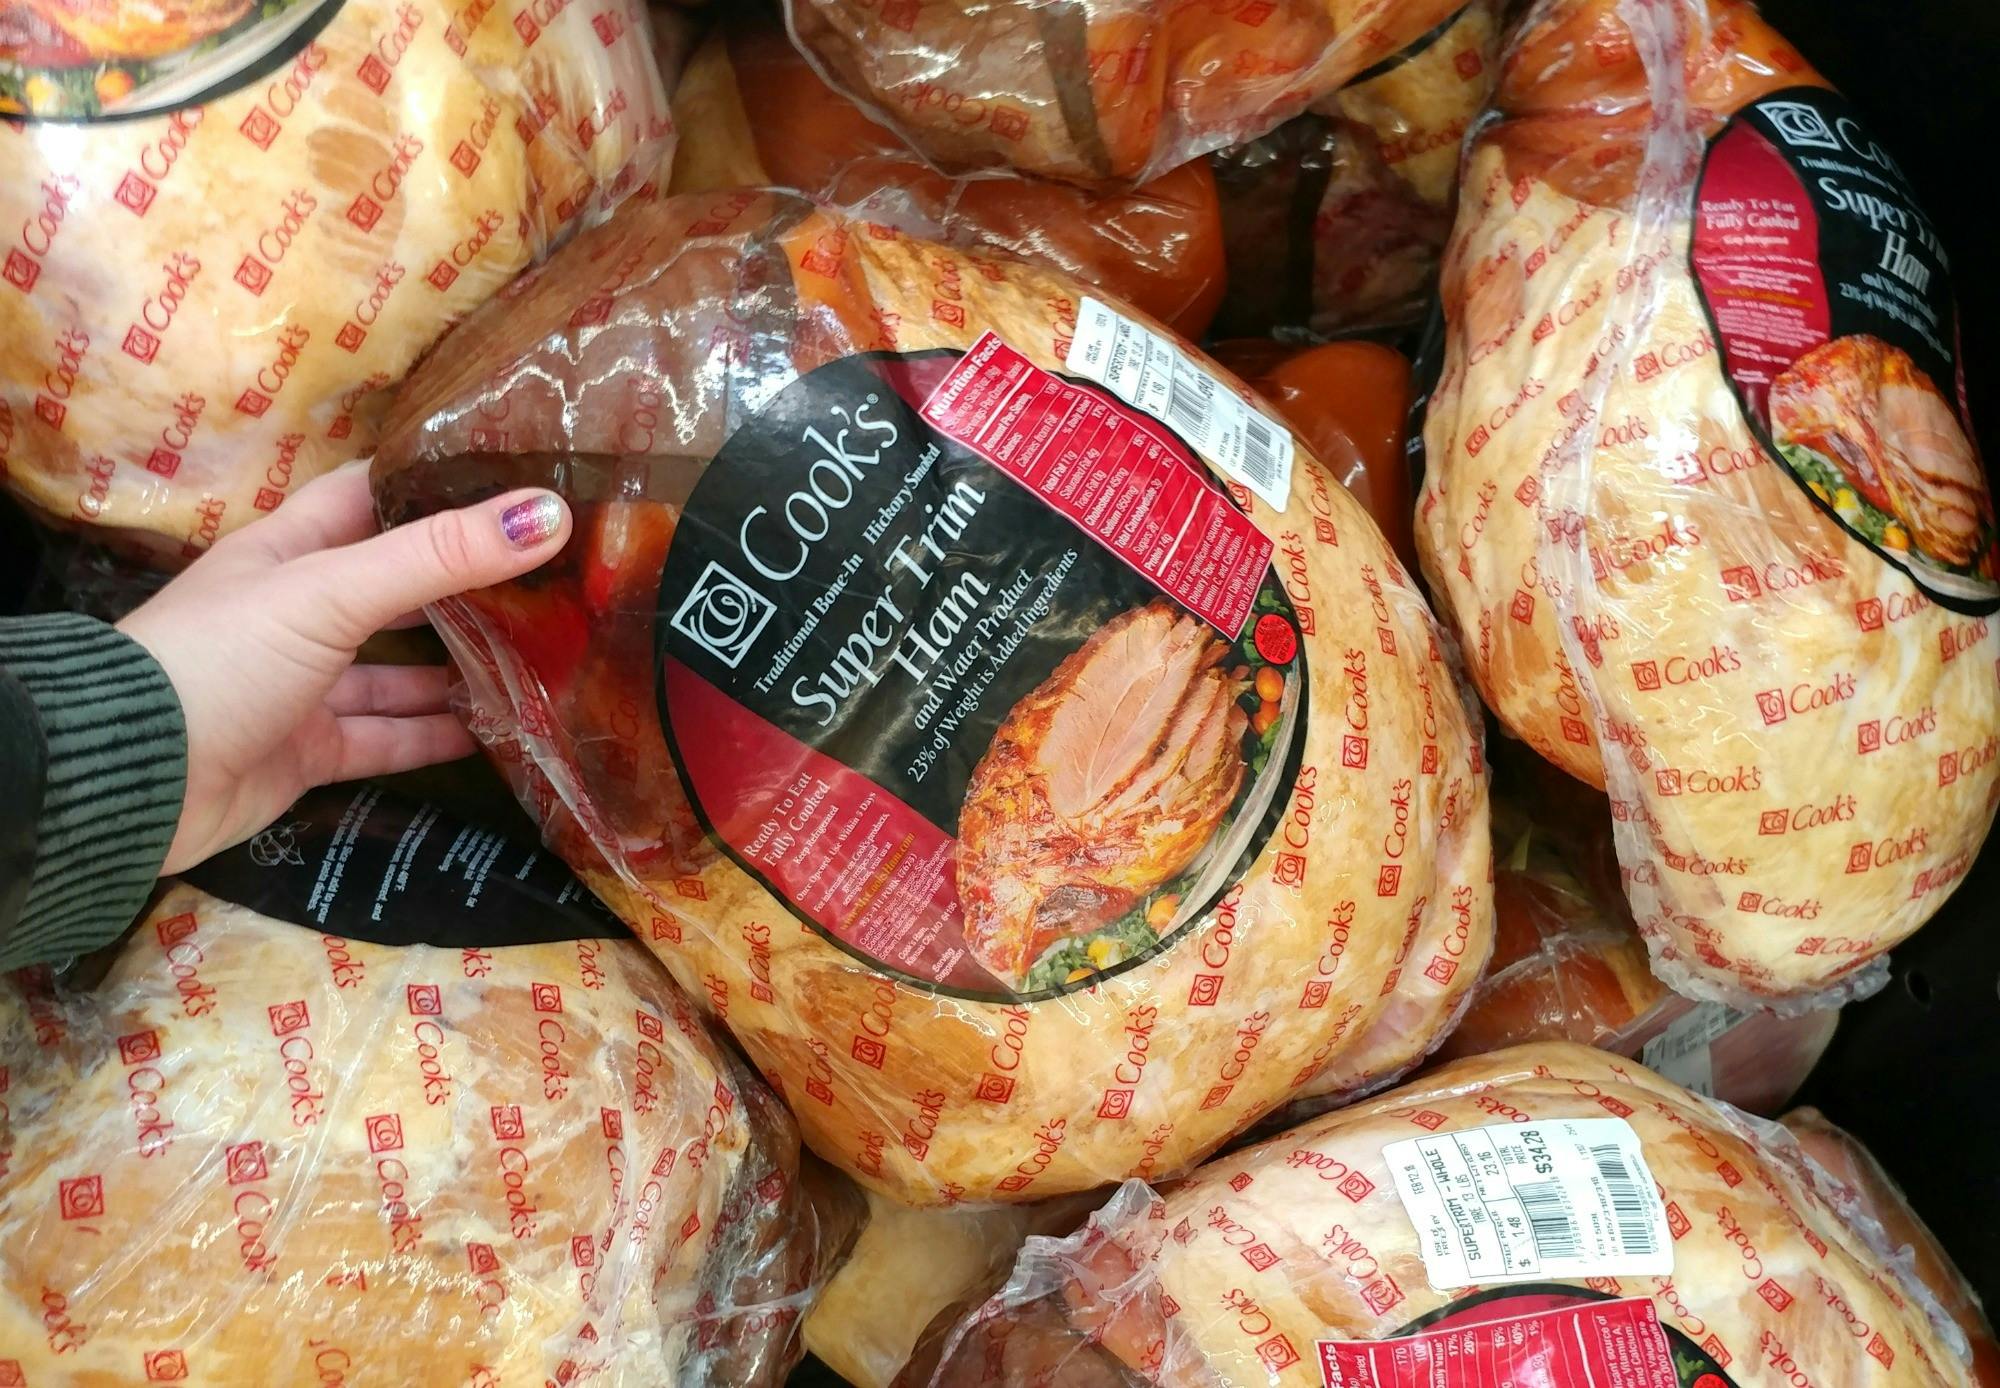 A person holding a Cook's ham in front of a store display case of hams.